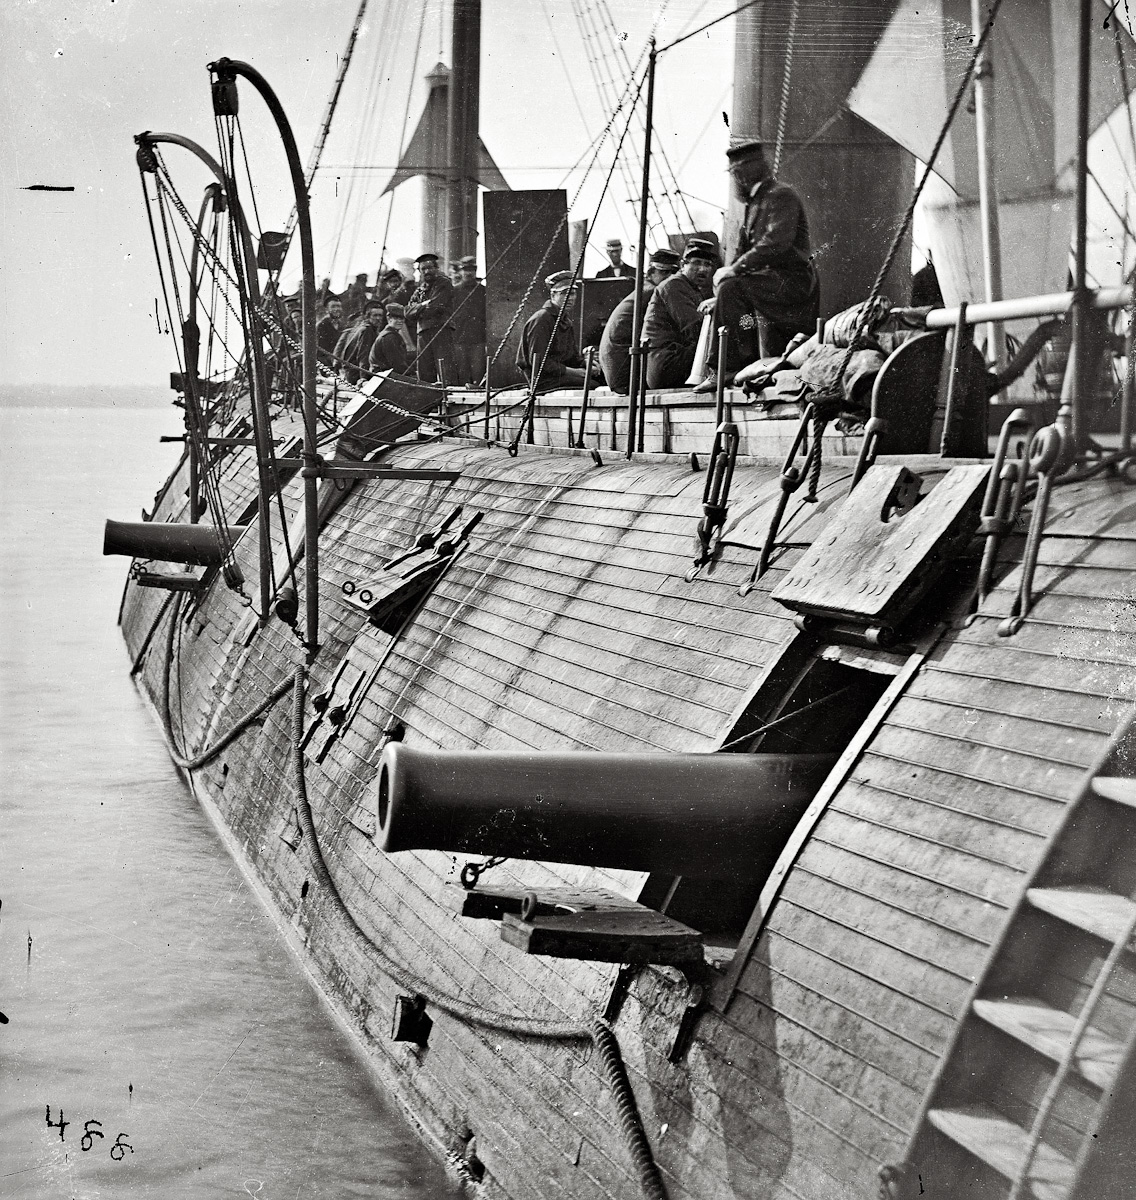 002  1862  On the James River in Virginia . "Effect of Confederate shot on Federal ironclad Galena "  James F. Gibson